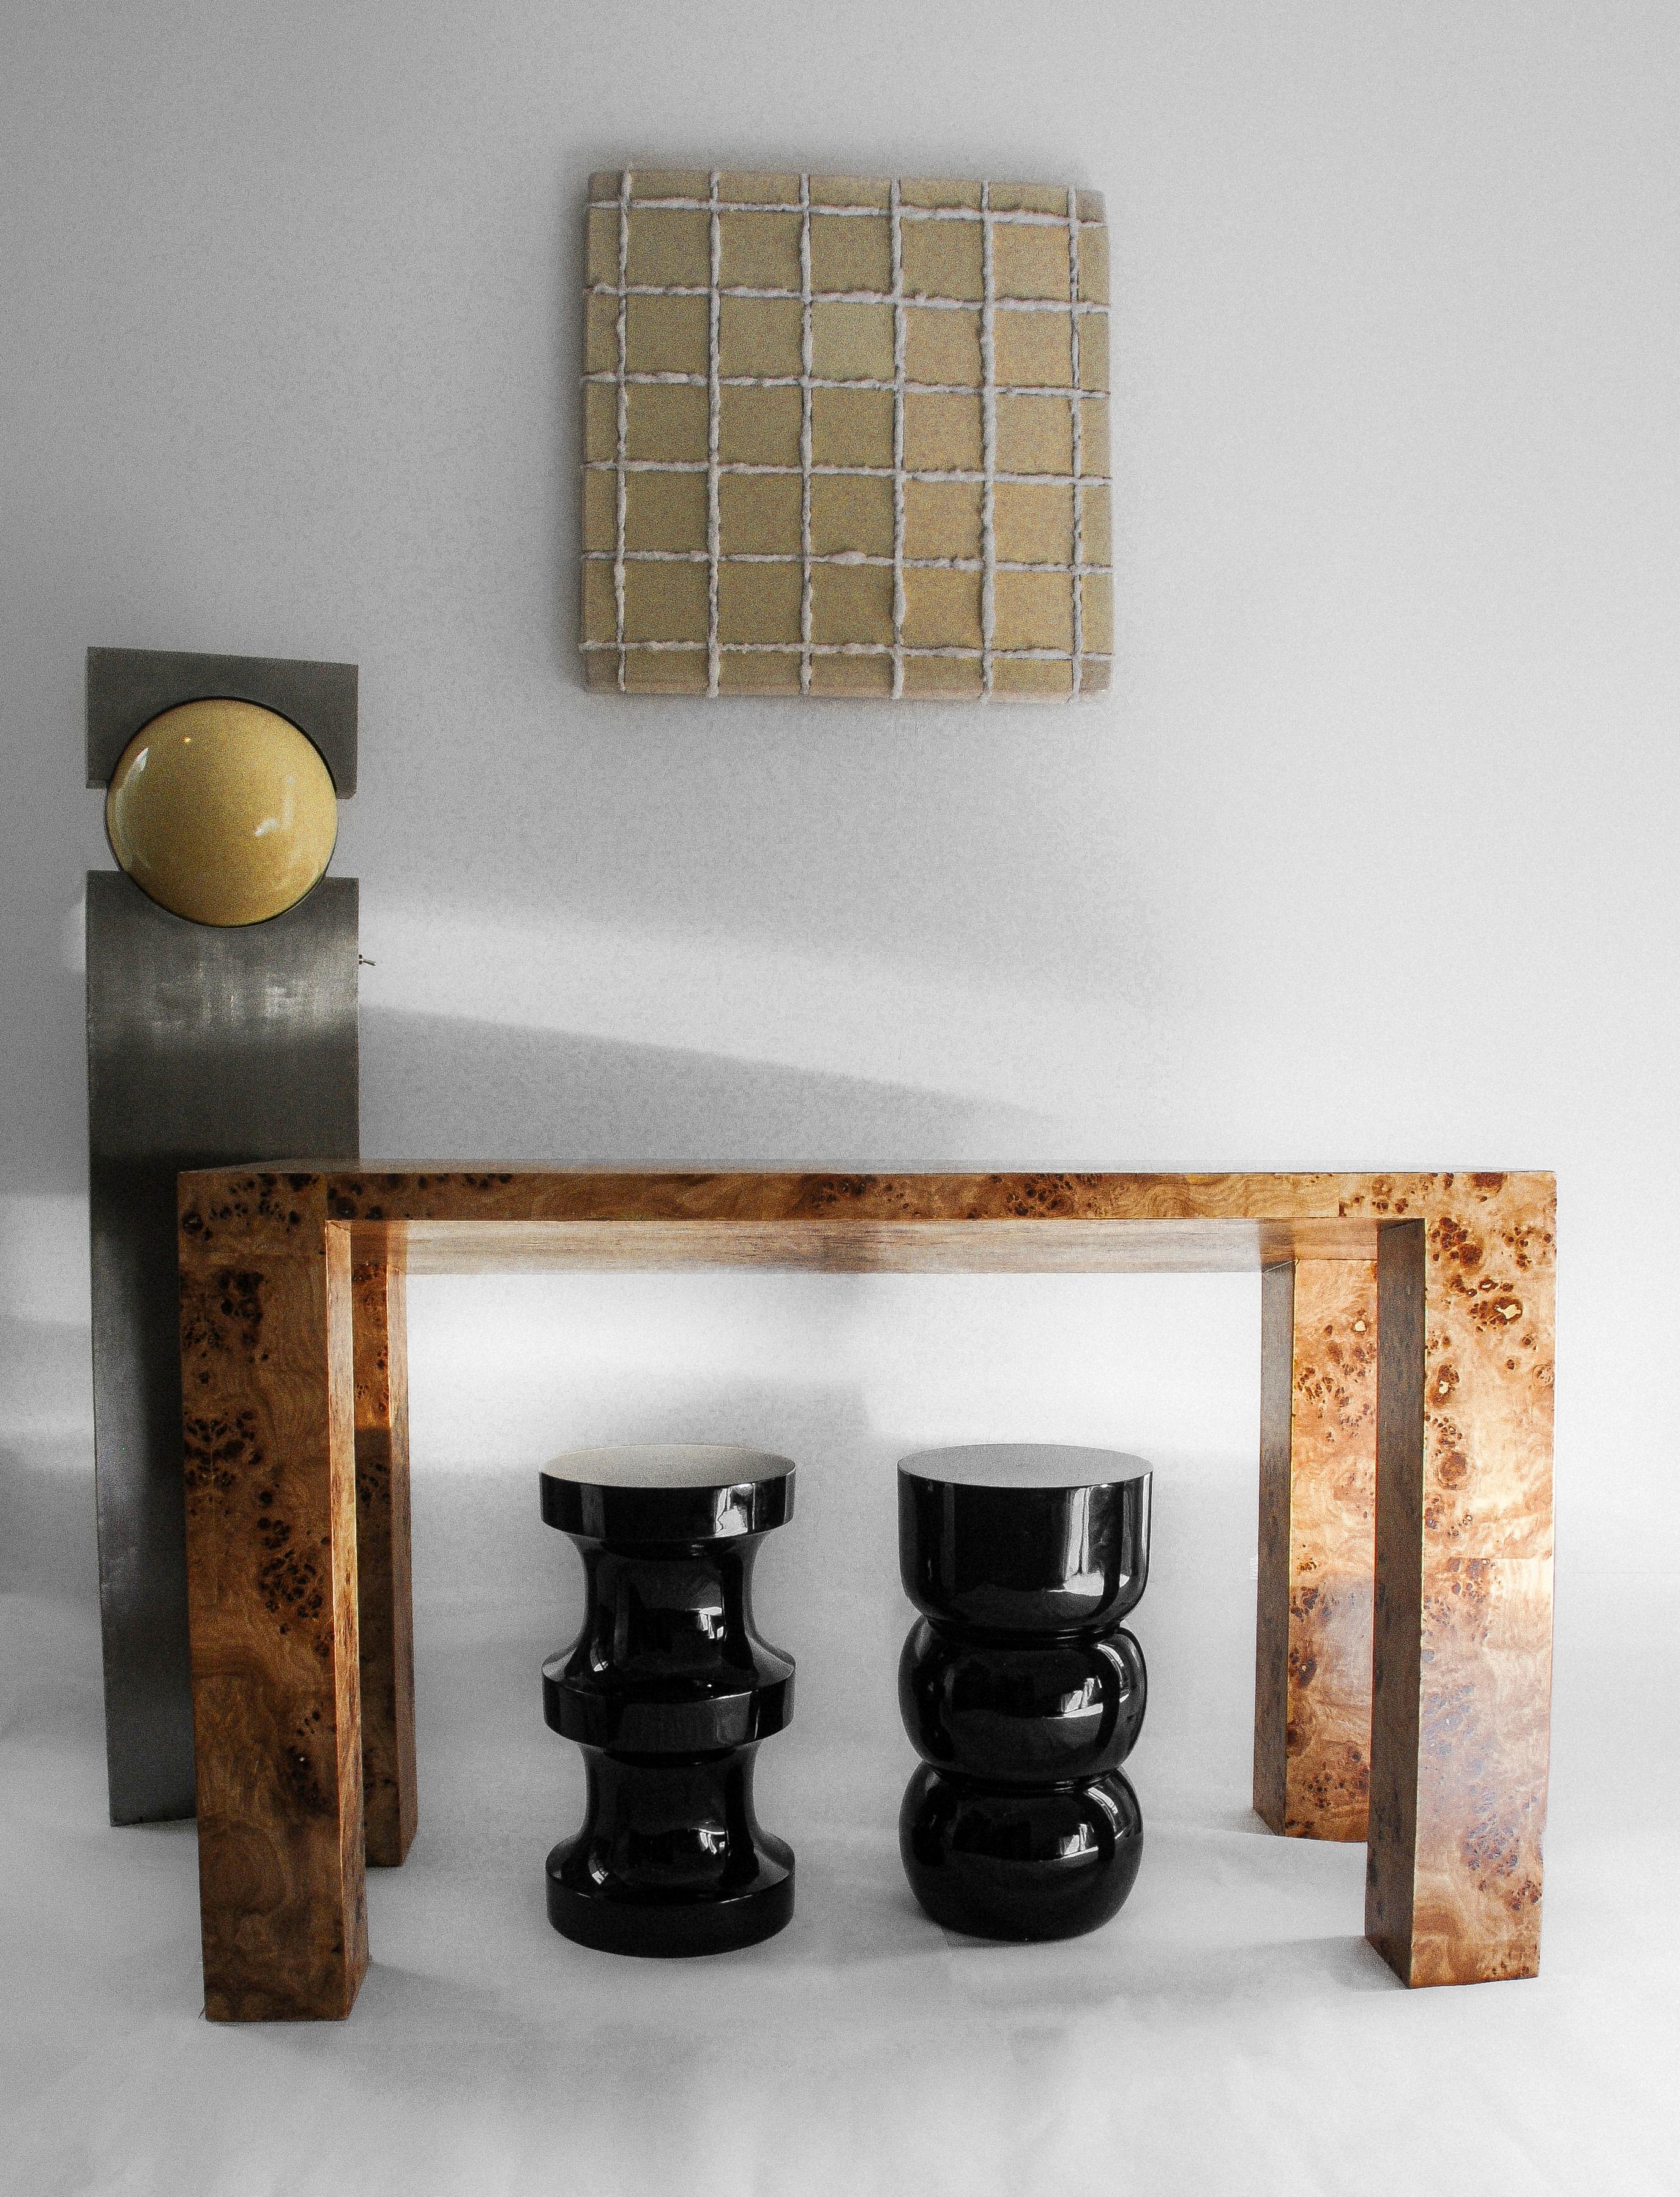 A console table which’s minimalist qualities are clocked by a clasic burl wood veneer. The mappa burl’s patterns grant the object an eccentric elegance while its brutalist structure and asymmetric angled detail seem to subdue its character into a